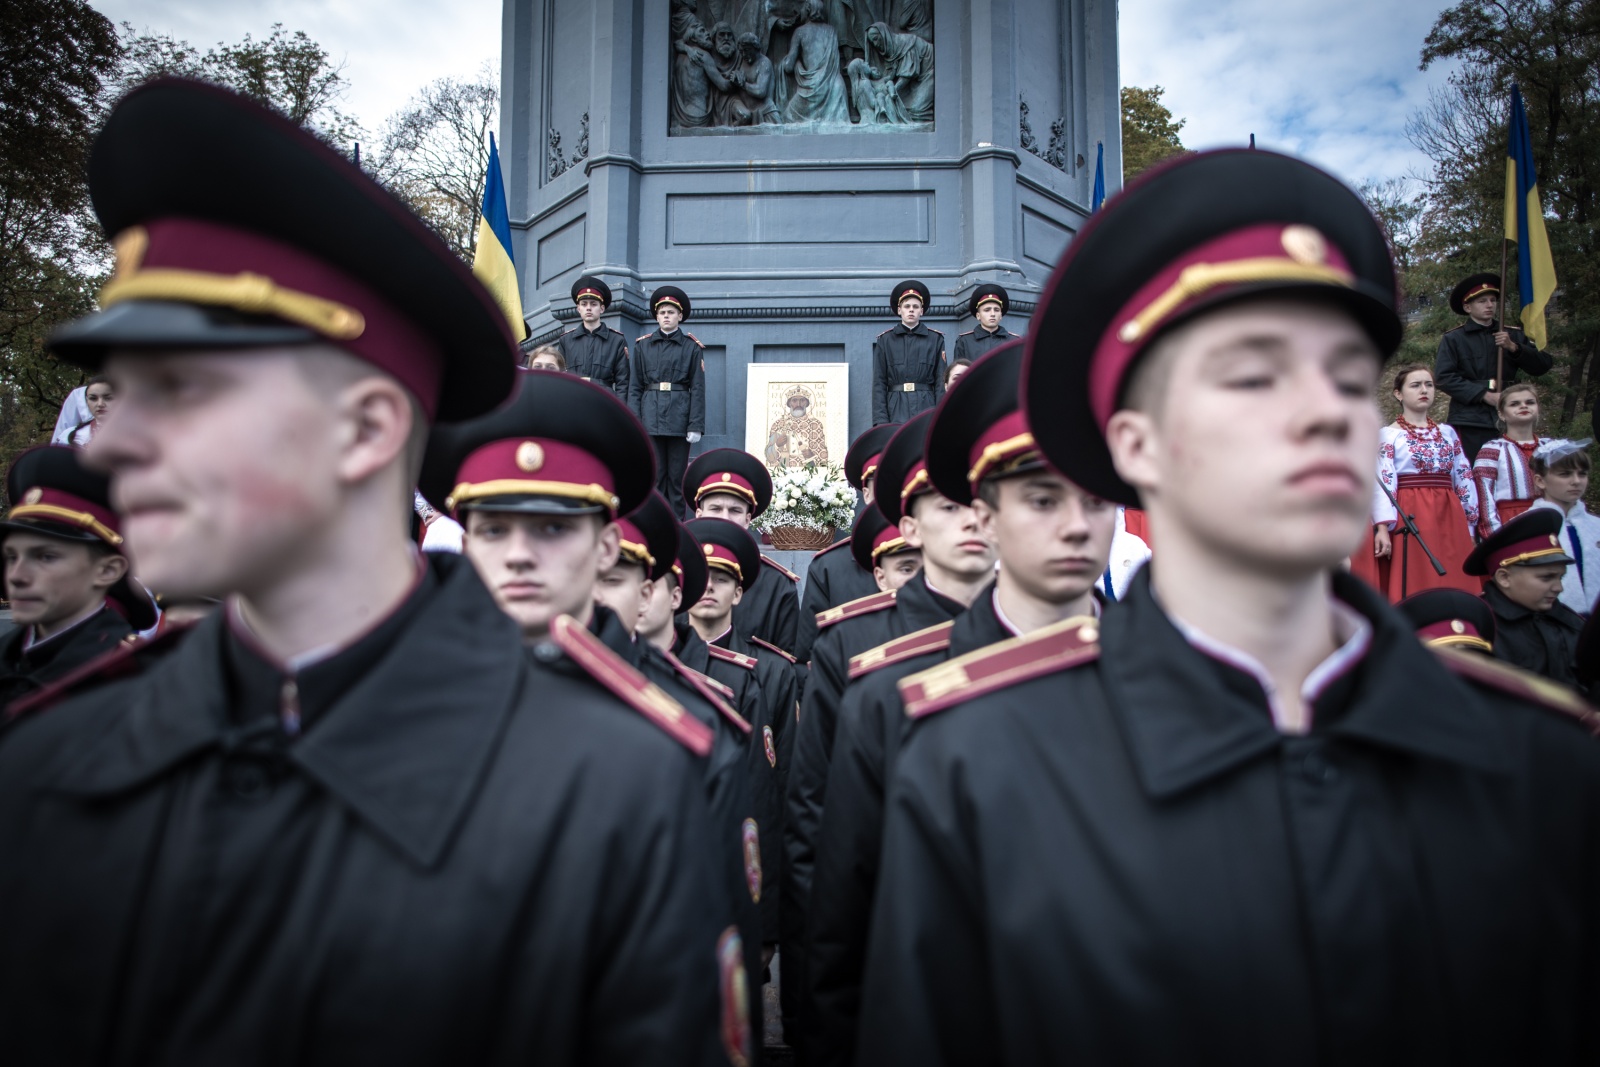 Kyiv, Ukraine (2019). The oat of the cadets of the Ukrainian military academy